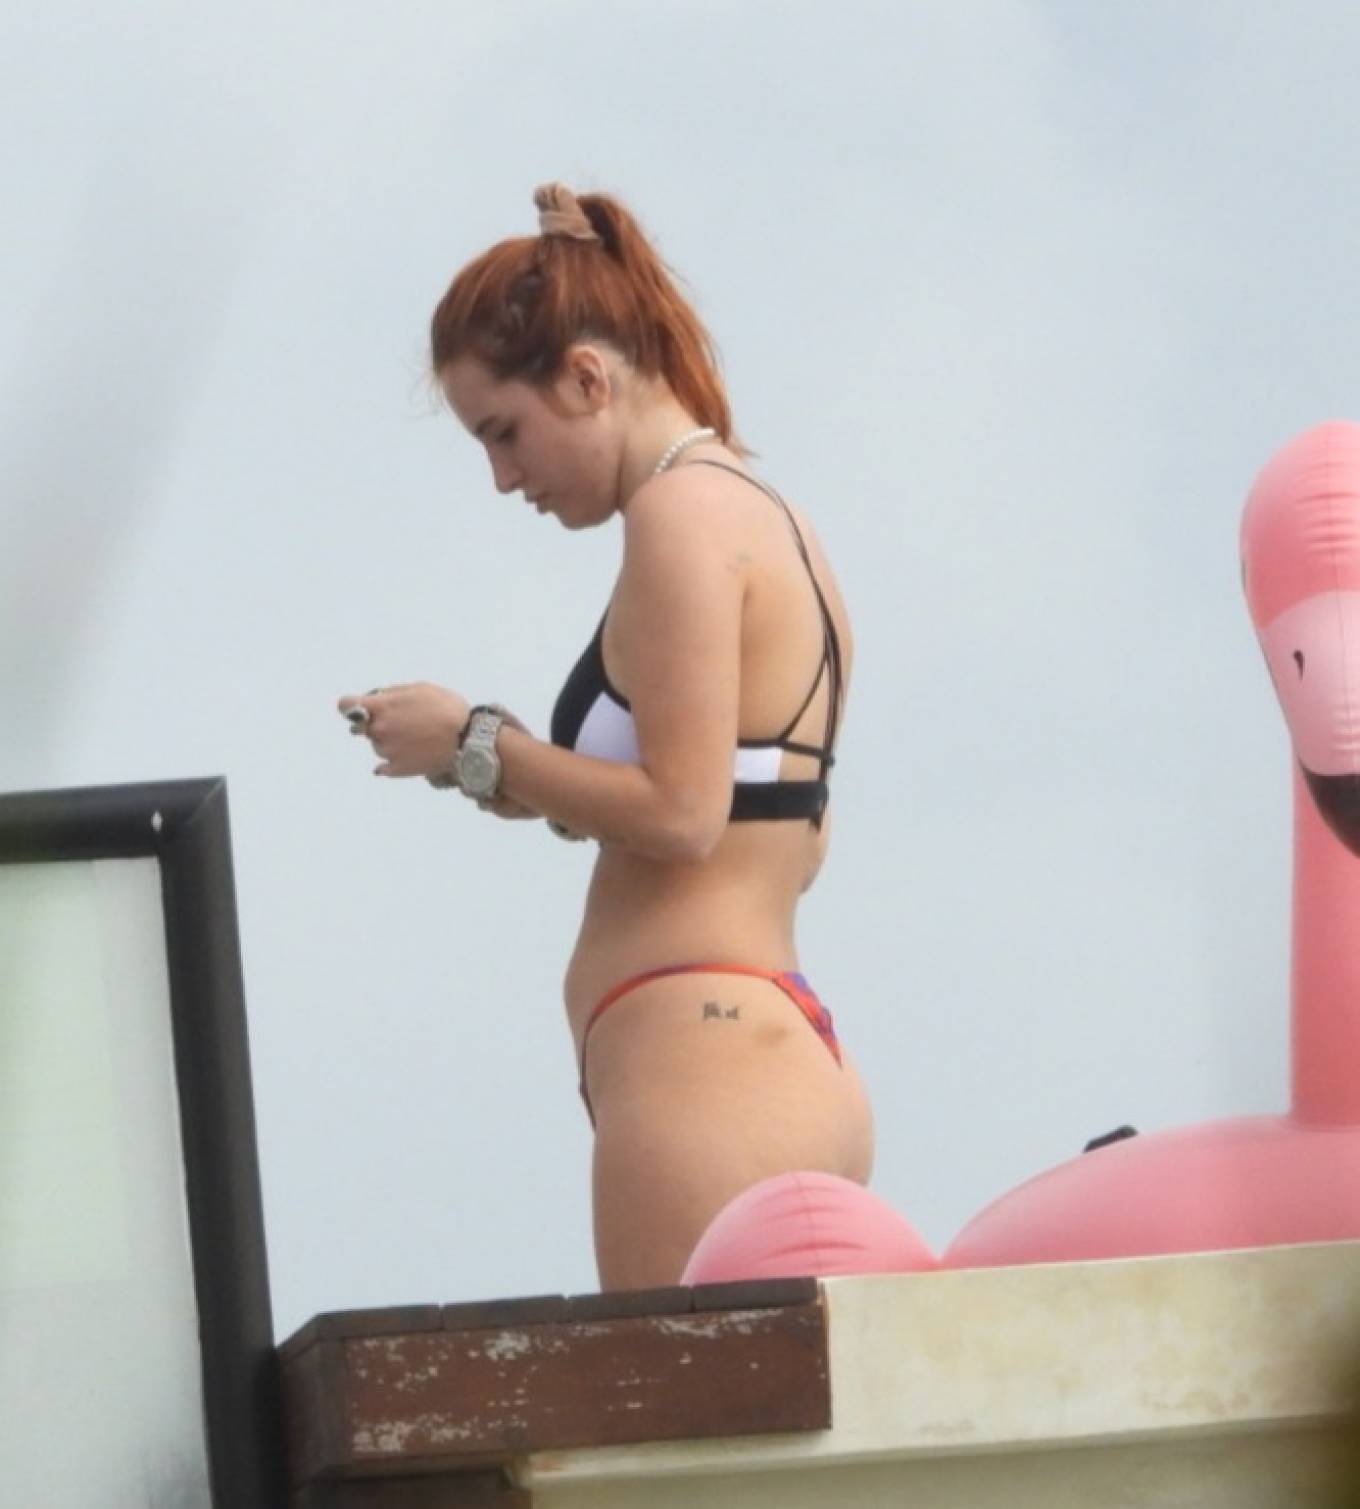 Bella Thorne - Pictured while on vacation in Mexico.